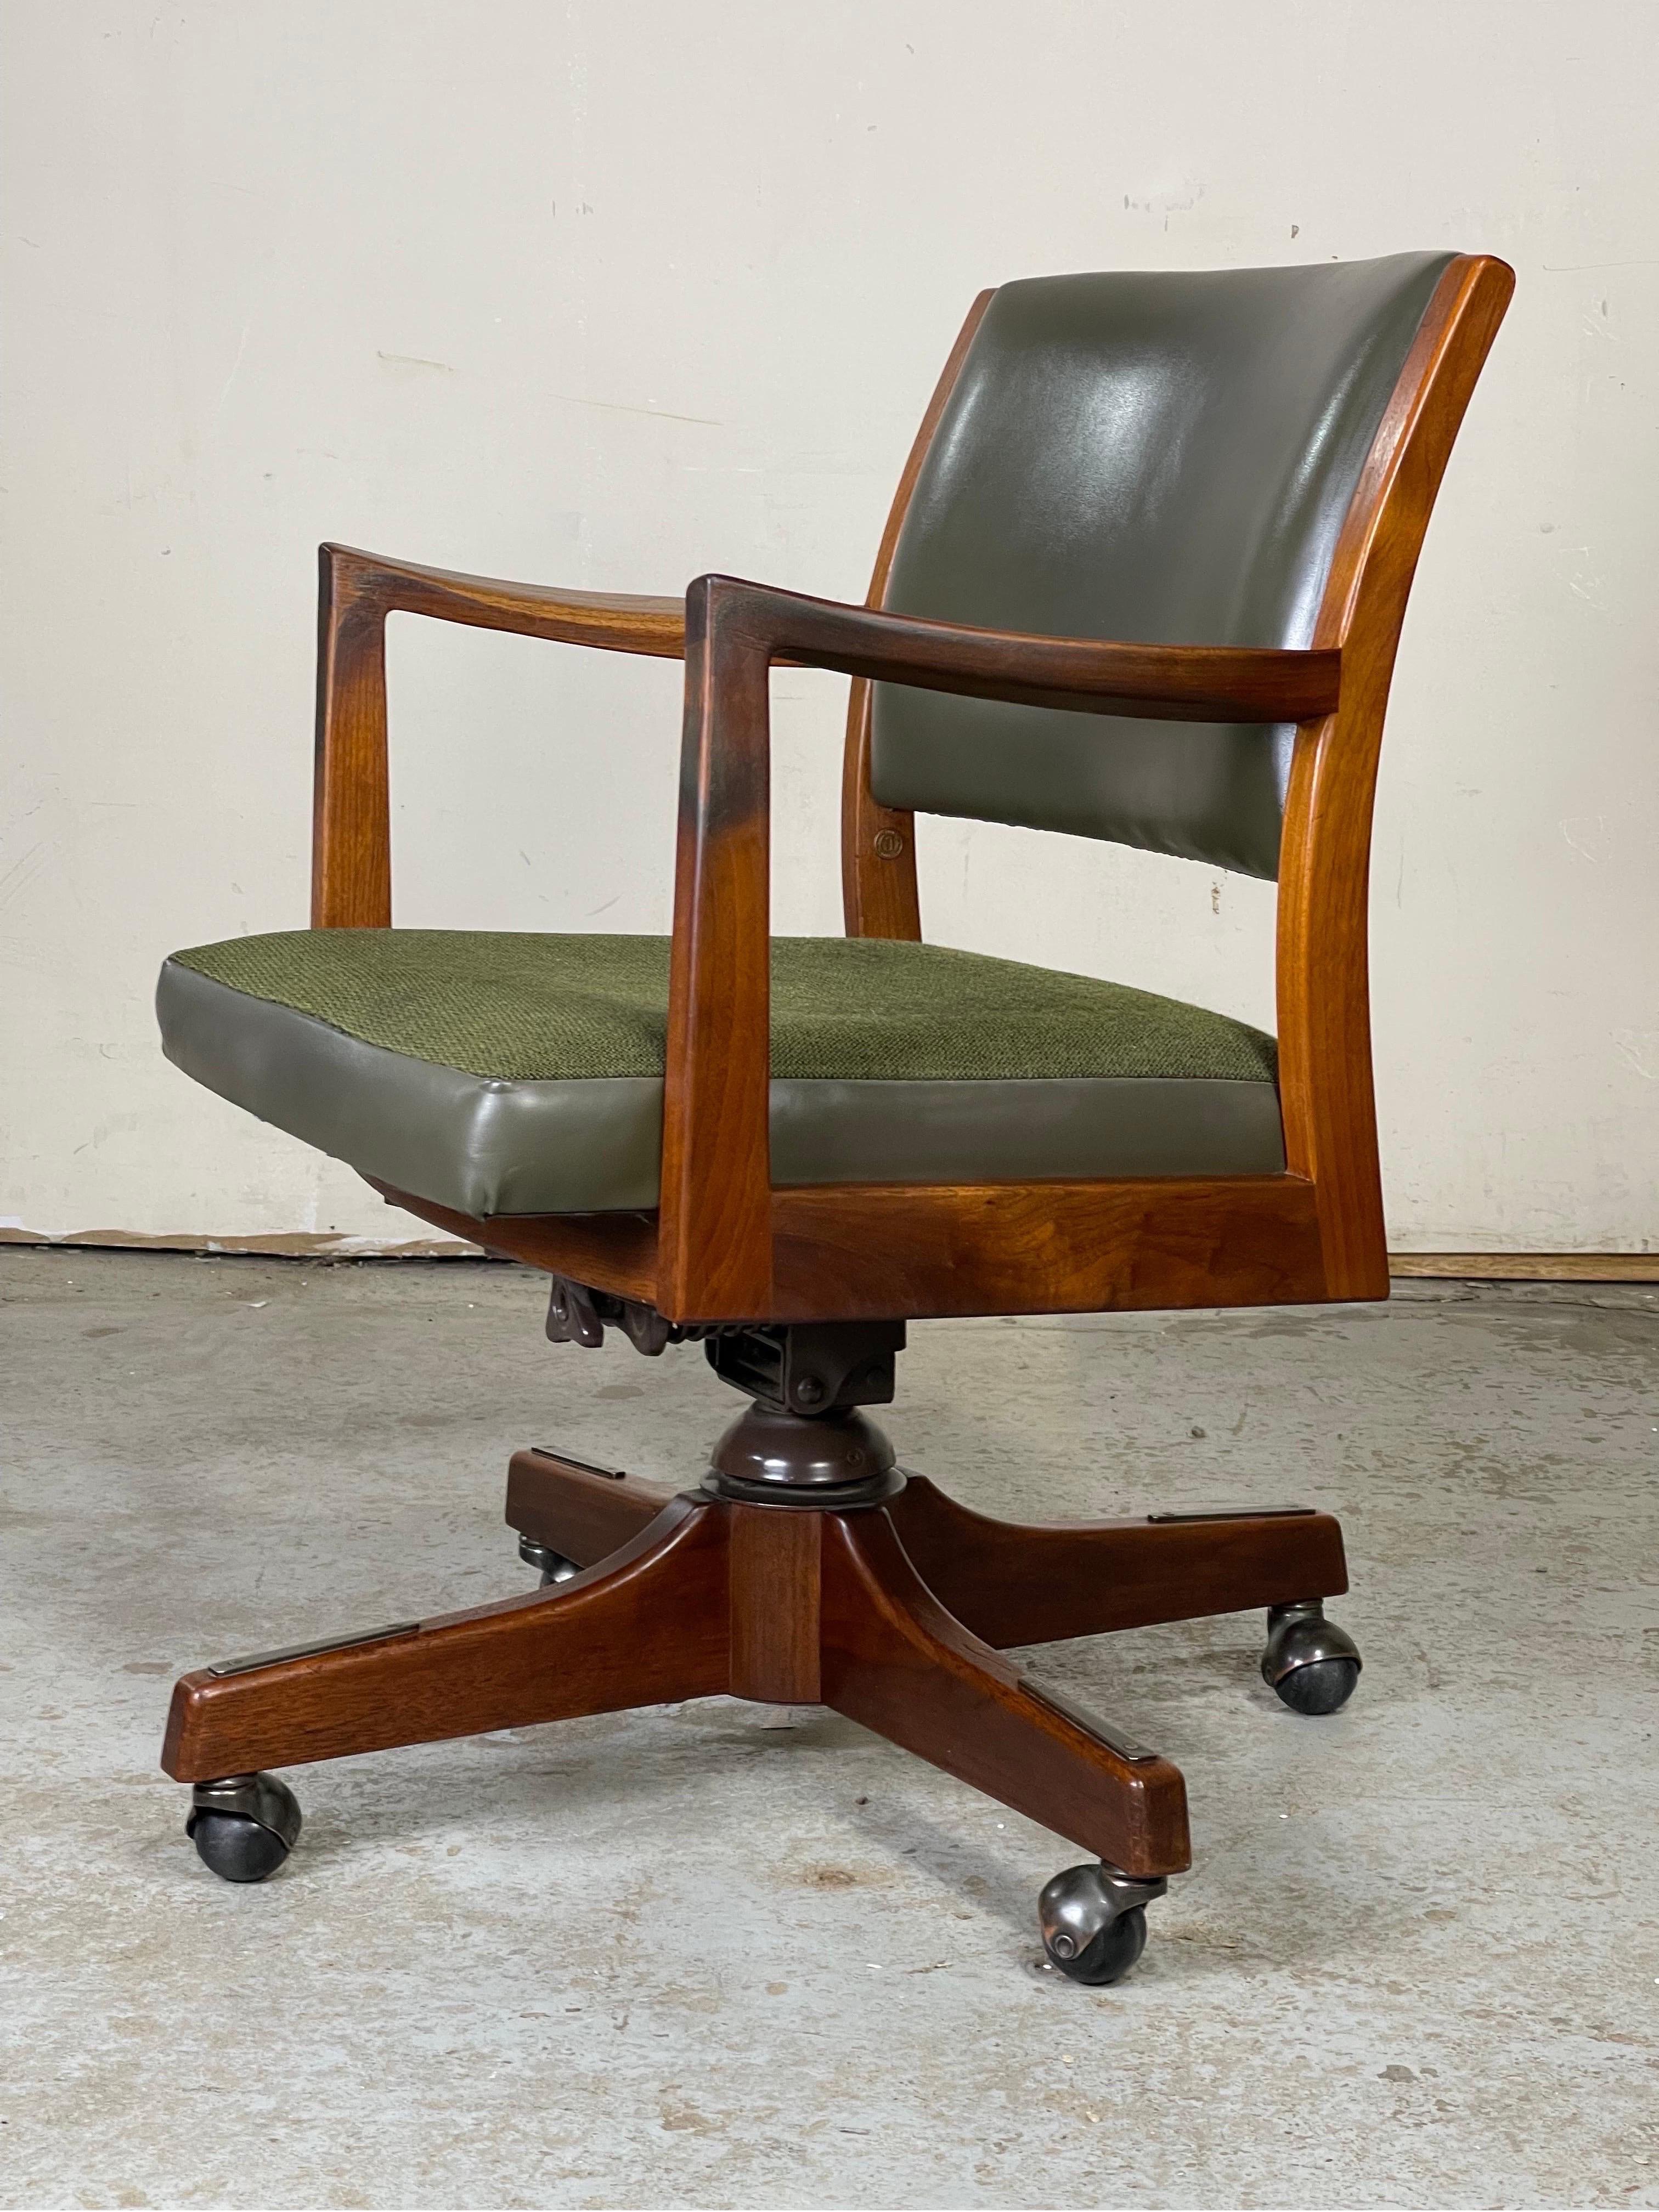 Patina rich swivel and tilt desk chair by Johnson chair Co. Nice wood dowel construction with a lovely base. Very well made and with a lot of age appropriate patina covering the arm rests. 
Measures: 32.5